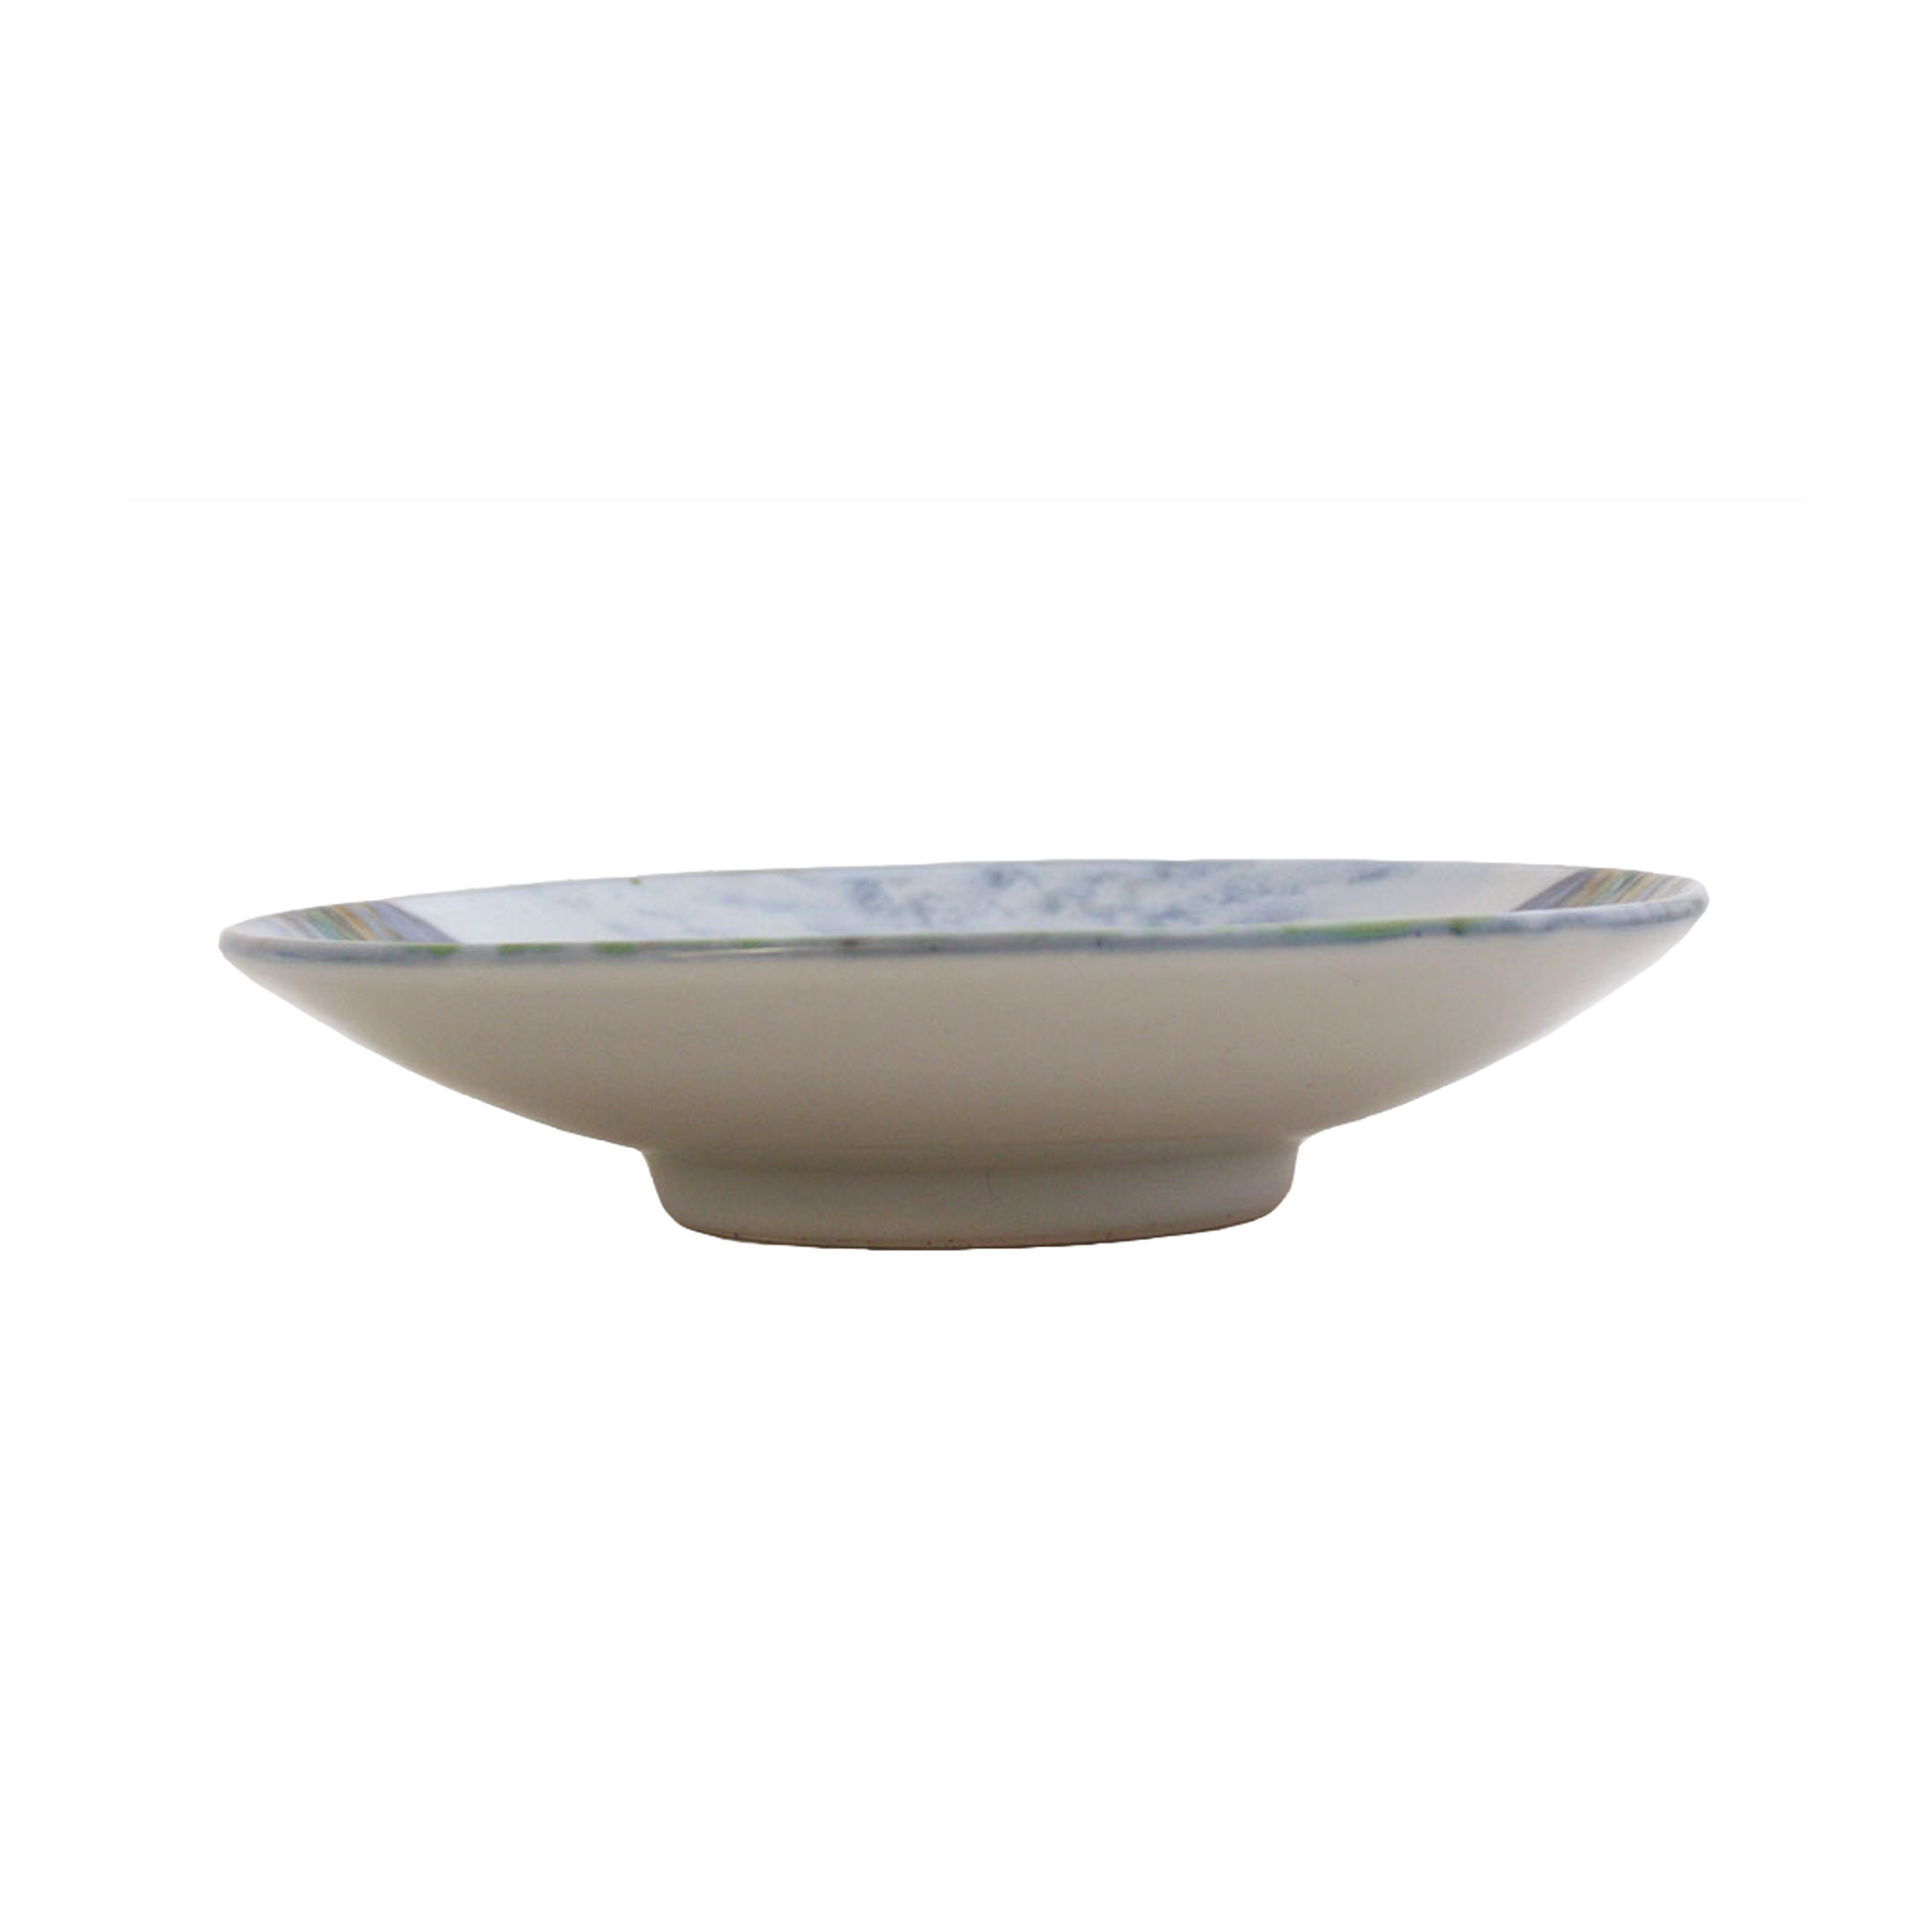 Medium glazed stoneware dish, featuring hand painted design of a rock pool bottom, profile side view